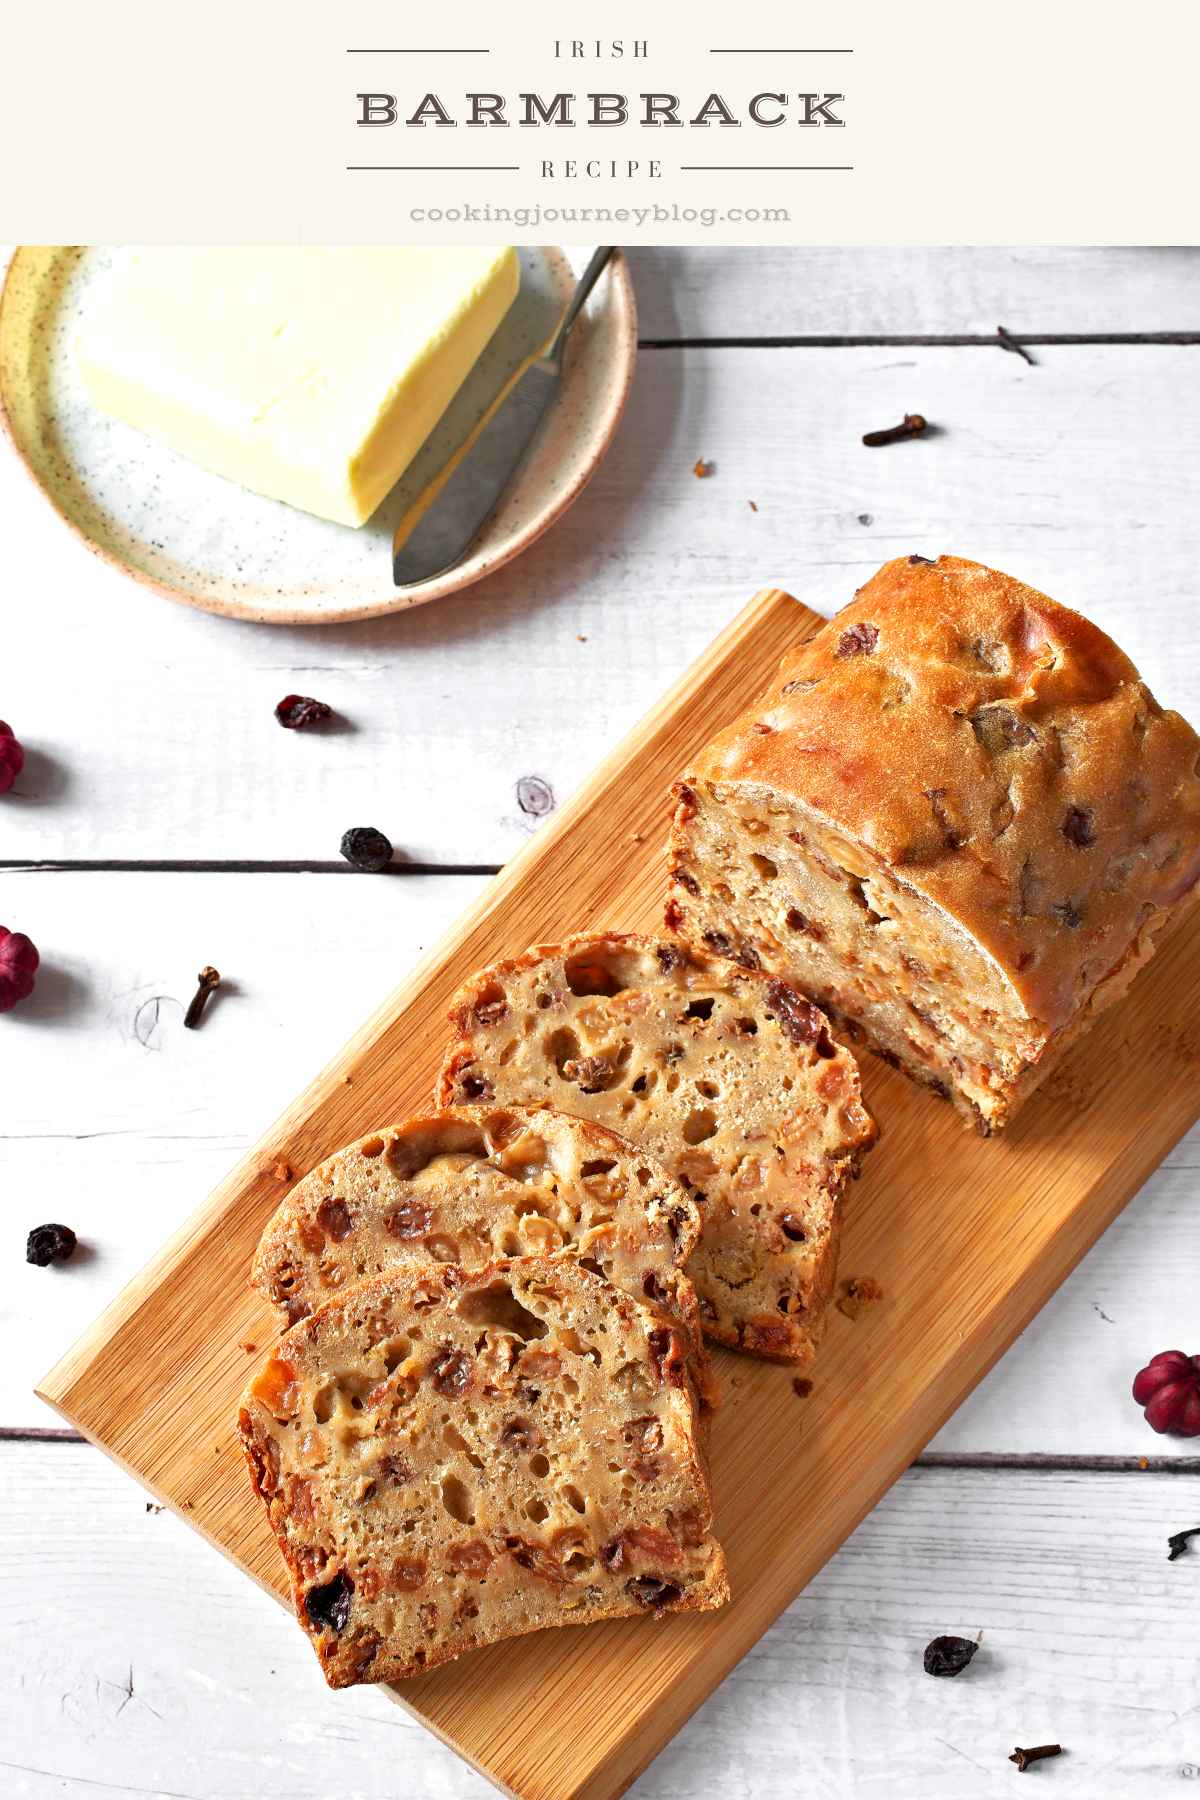 Barmbrack - Irish sweet bread, cut and served on the board